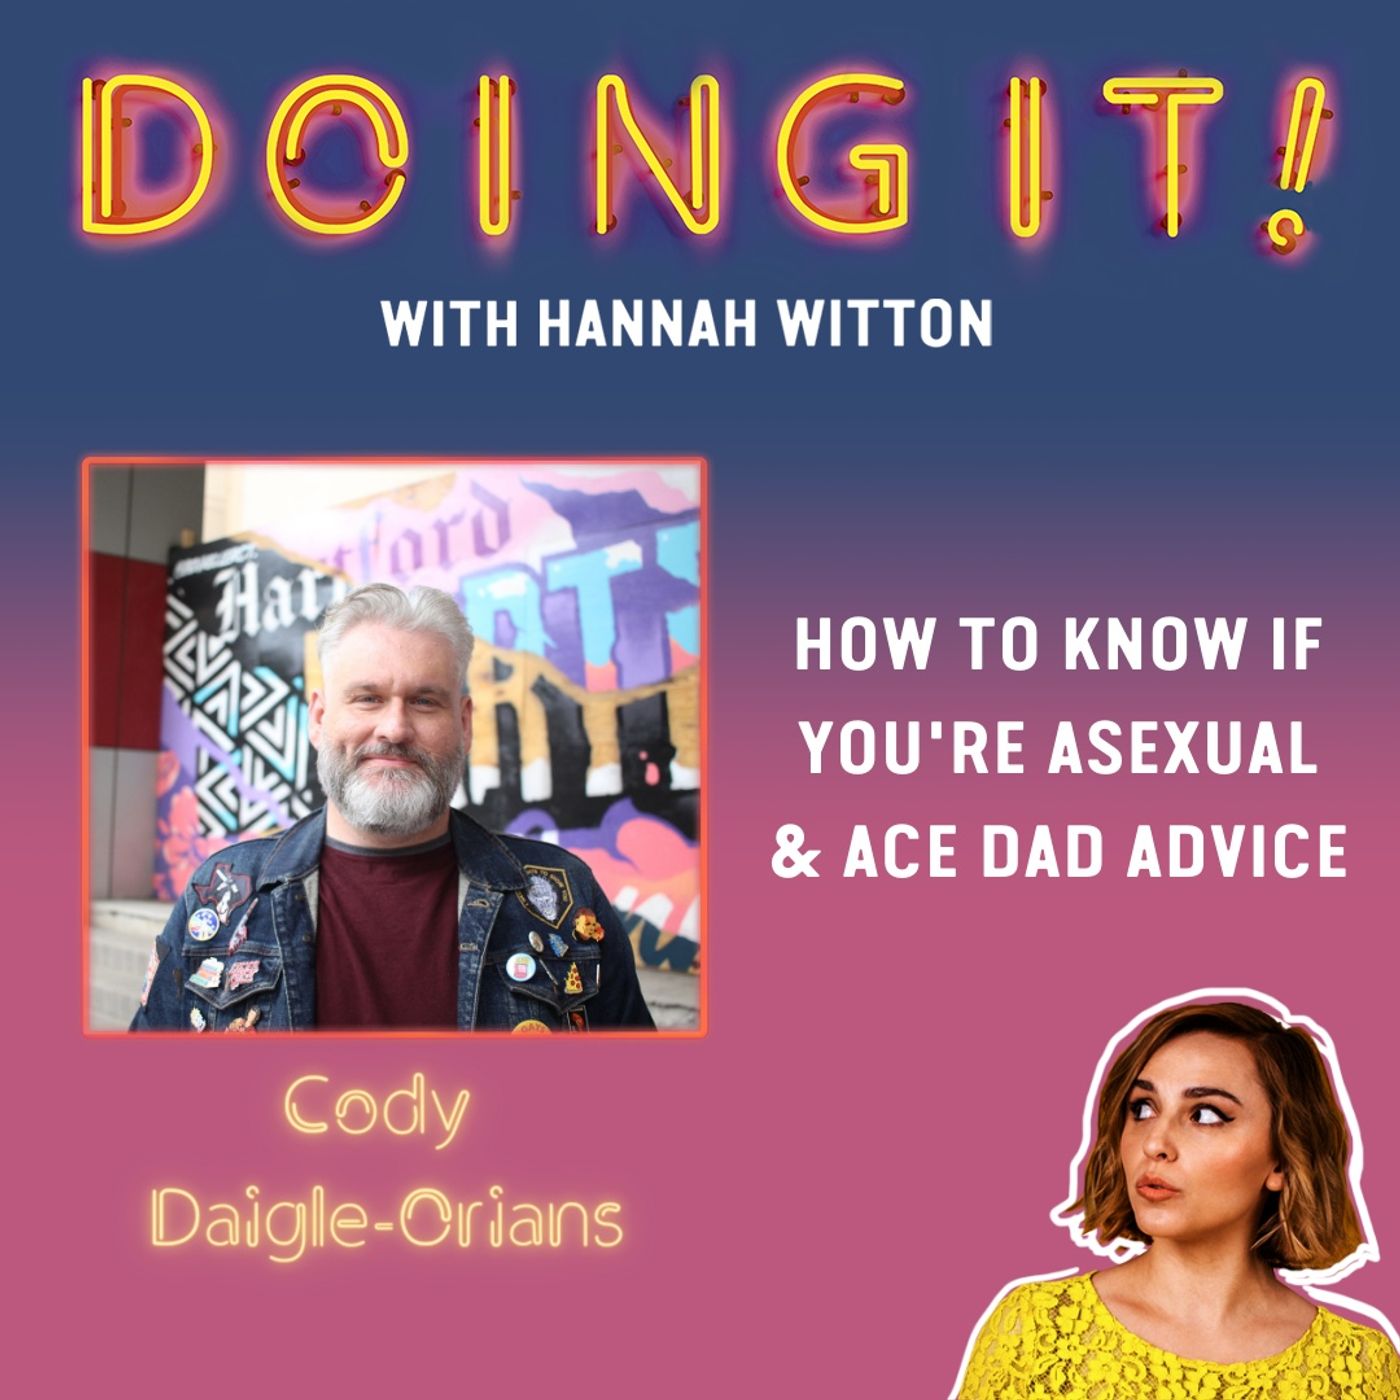 How To Know If You're Asexual & Ace Dad Advice with Cody Daigle-Orians